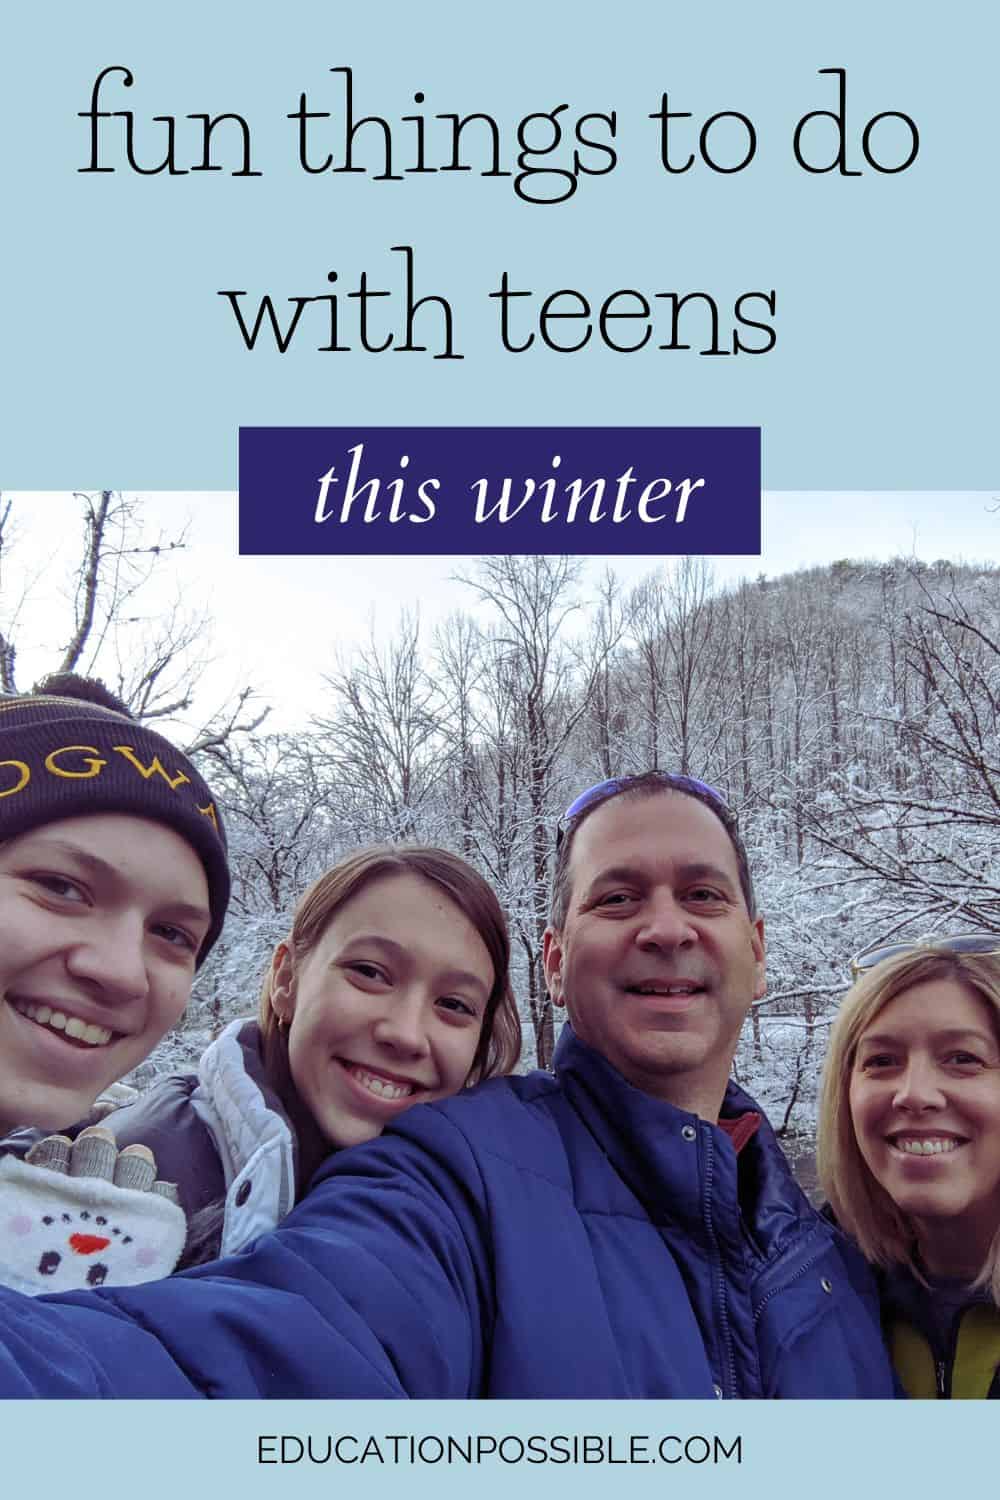 Fun Winter Activities to Do With Your Teens